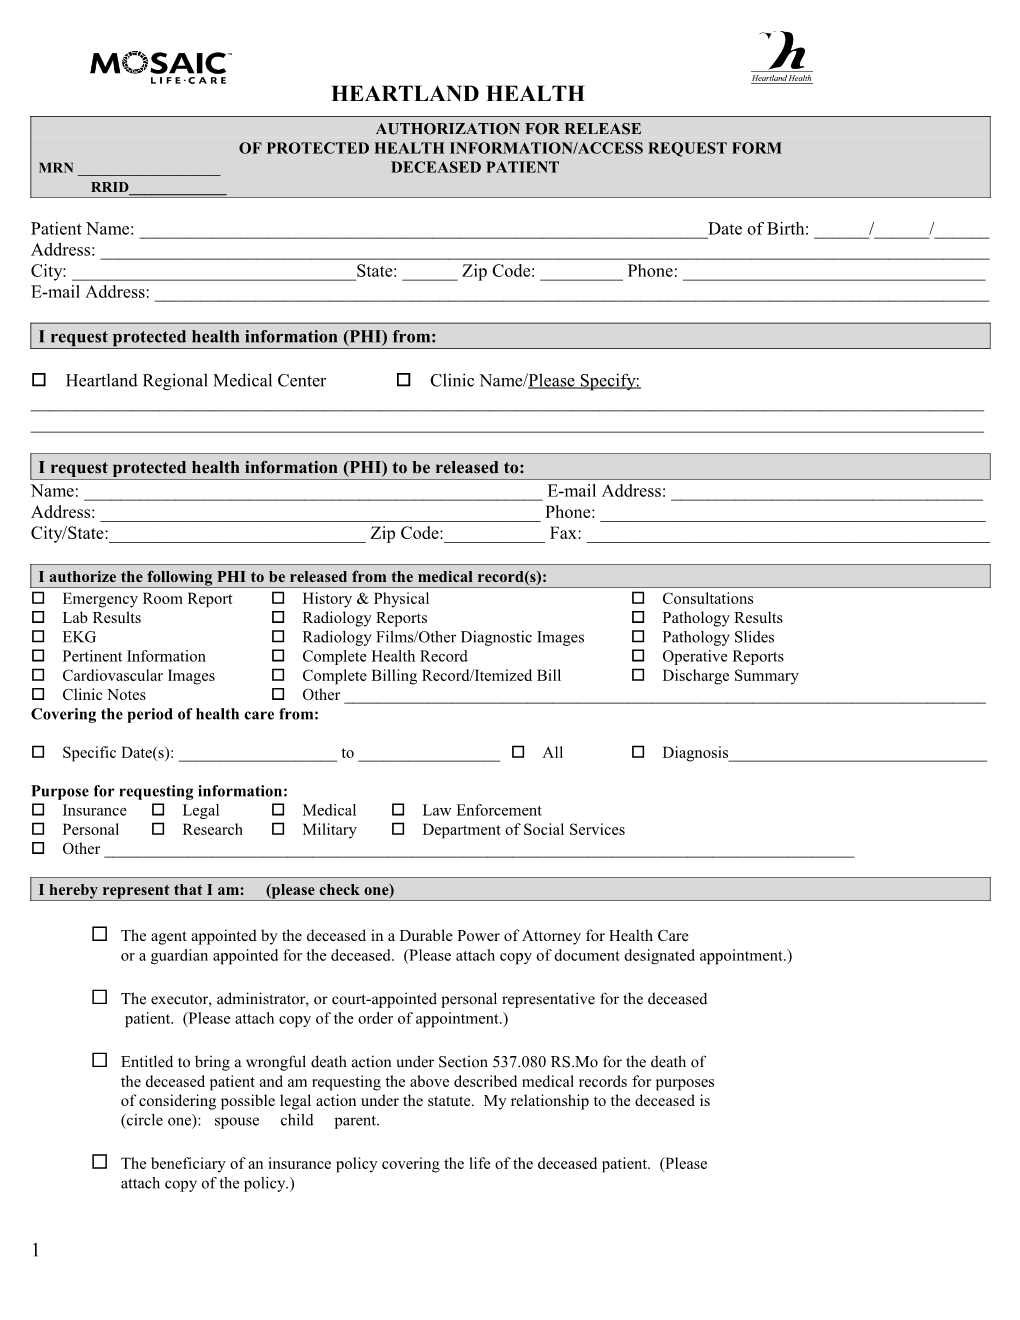 Of Protected Health Information/Access Request Form